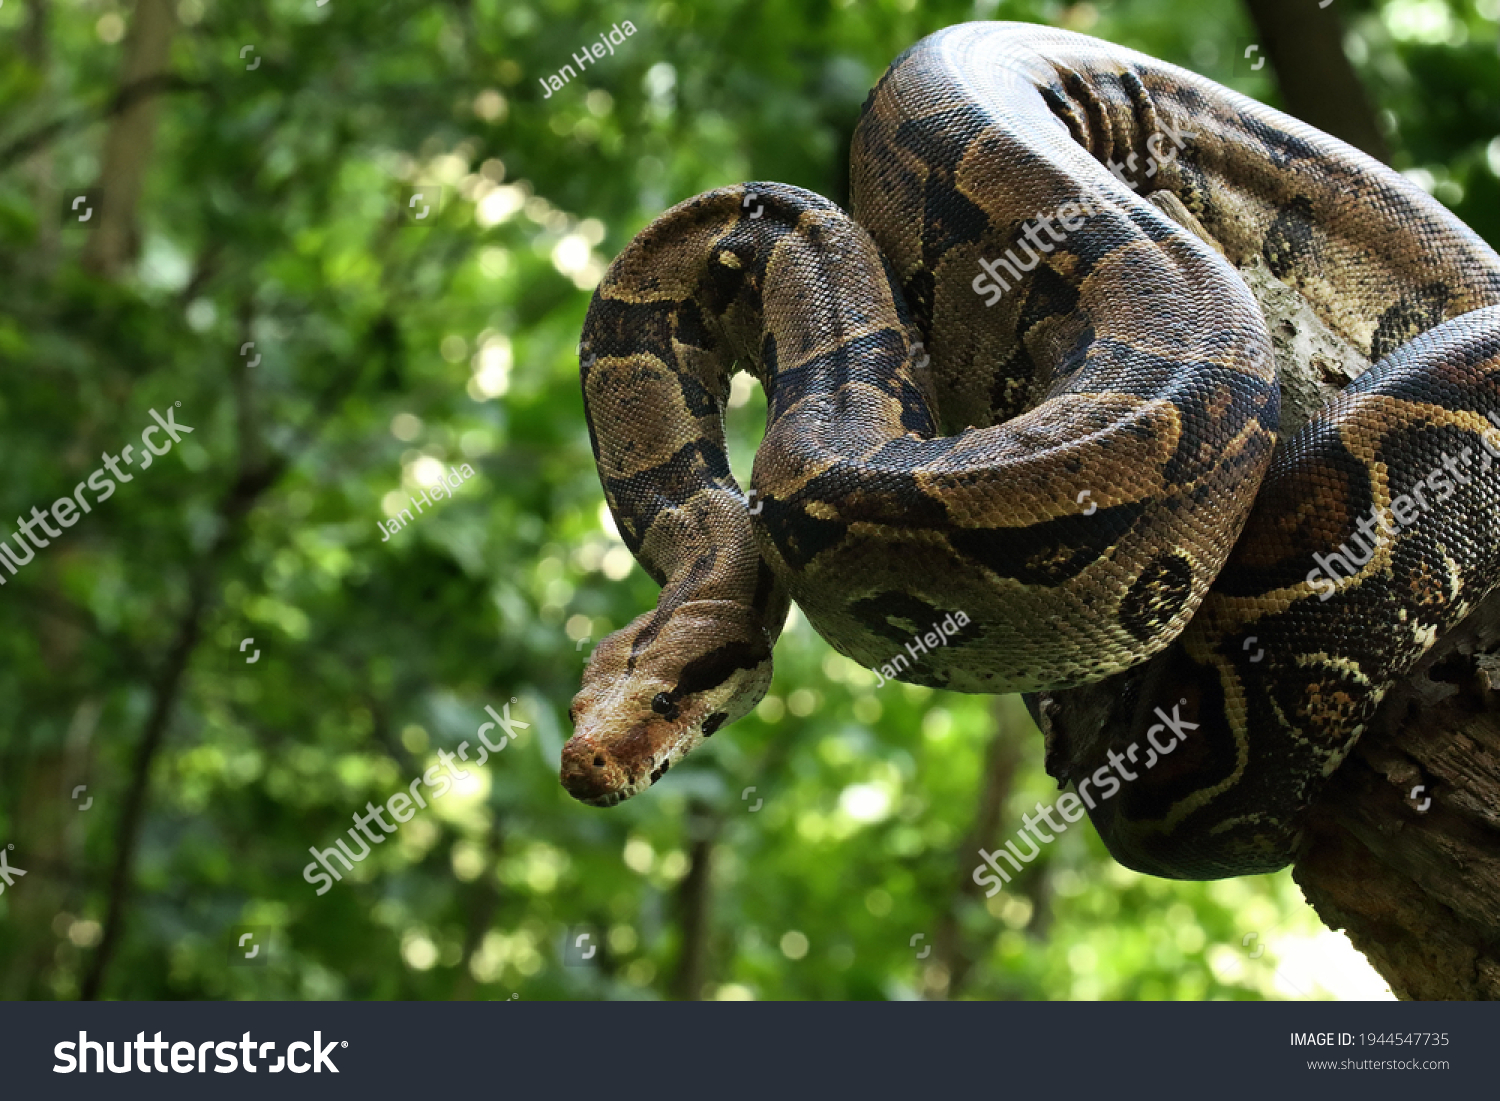 The boa constrictor (Boa constrictor), also called the red-tailed boa or the common boa, on the old branche in green forest. Green background. #1944547735